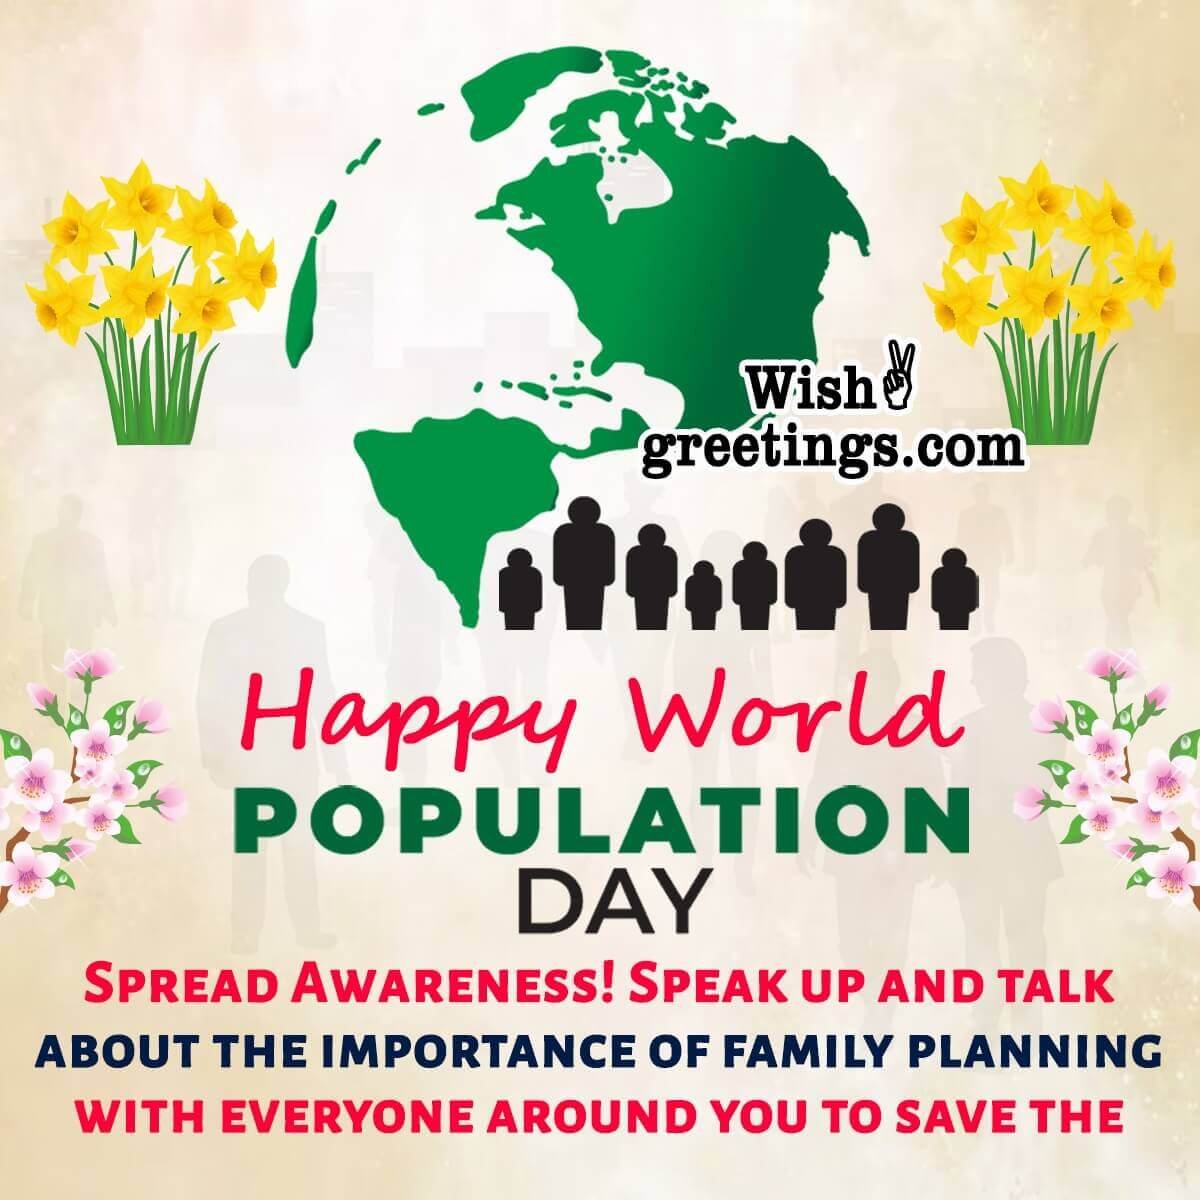 World Population Day Wishes Messages, Slogans, Quotes